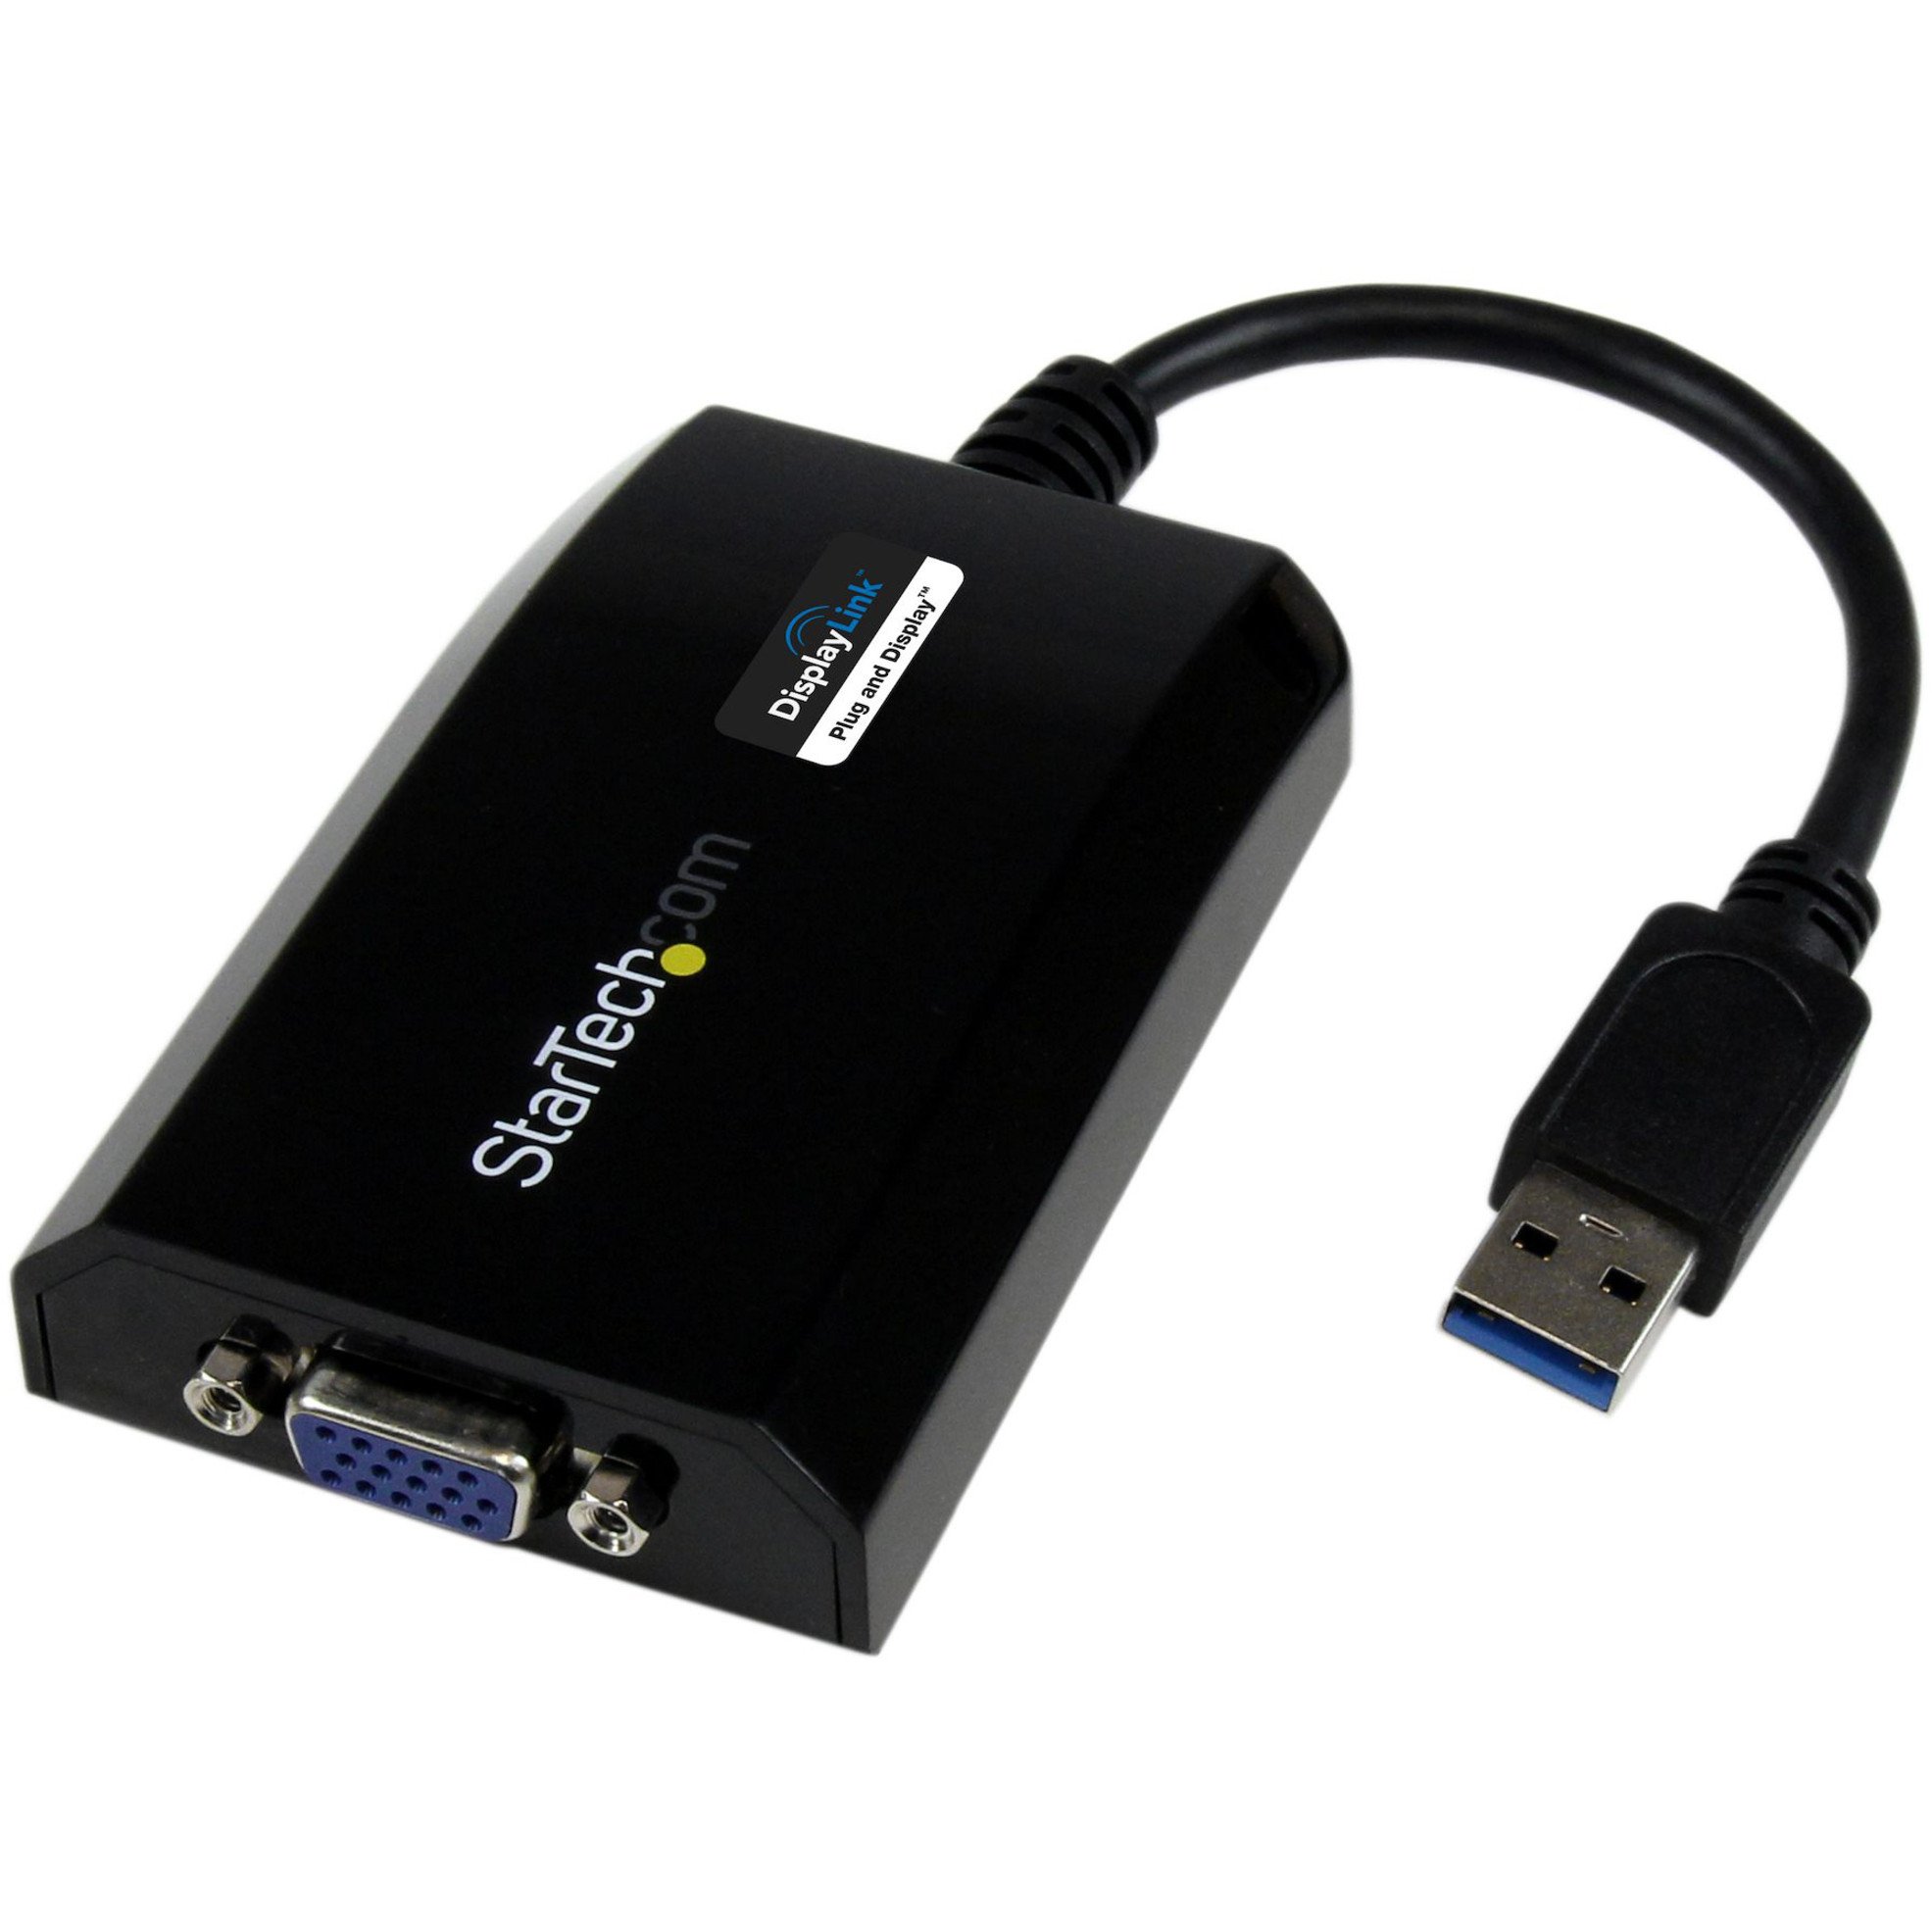 Startech .com USB 3.0 to External Video Card Multi Monitor Adapter for Mac® and / 1080pConnect a VGA or pro... USB32VGAPRO - Corporate Armor